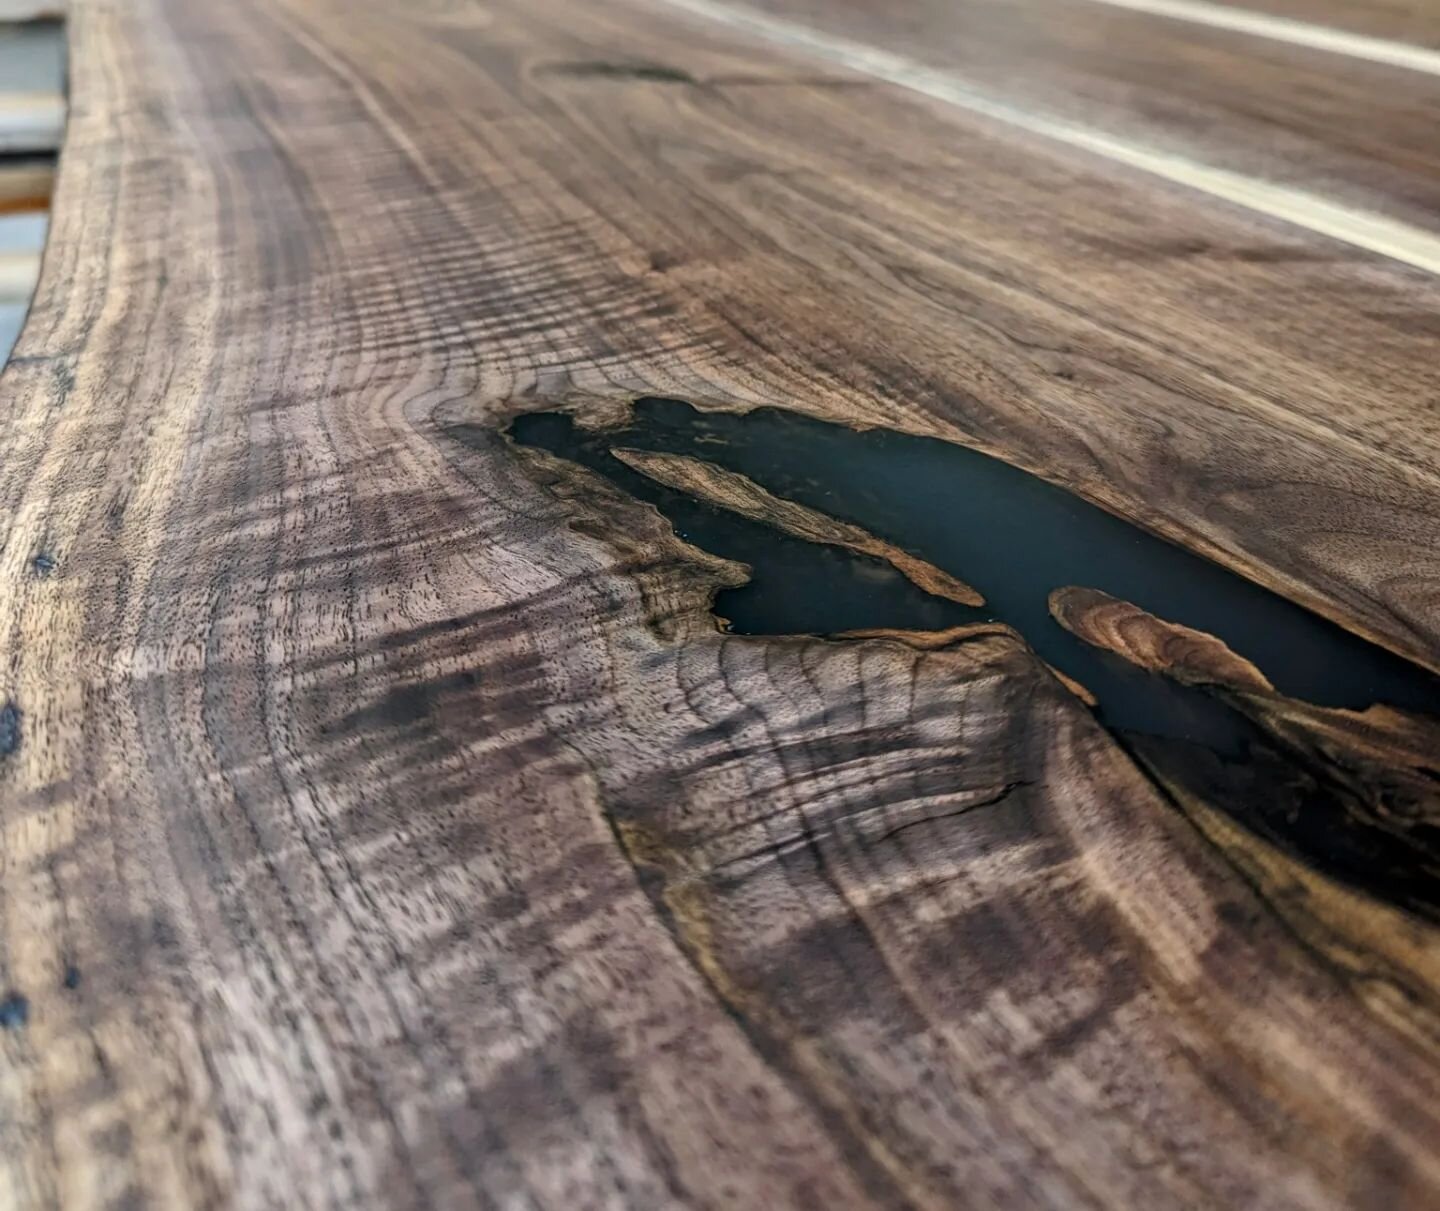 My clients brought in some absolutely gorgeous walnut slabs from the tree at their childhood home. I was able to turn them into an amazing live edge table for them!

What can I create for you?
.
.
.
#c2woodcraft #woodworking #resin #denver #englewood